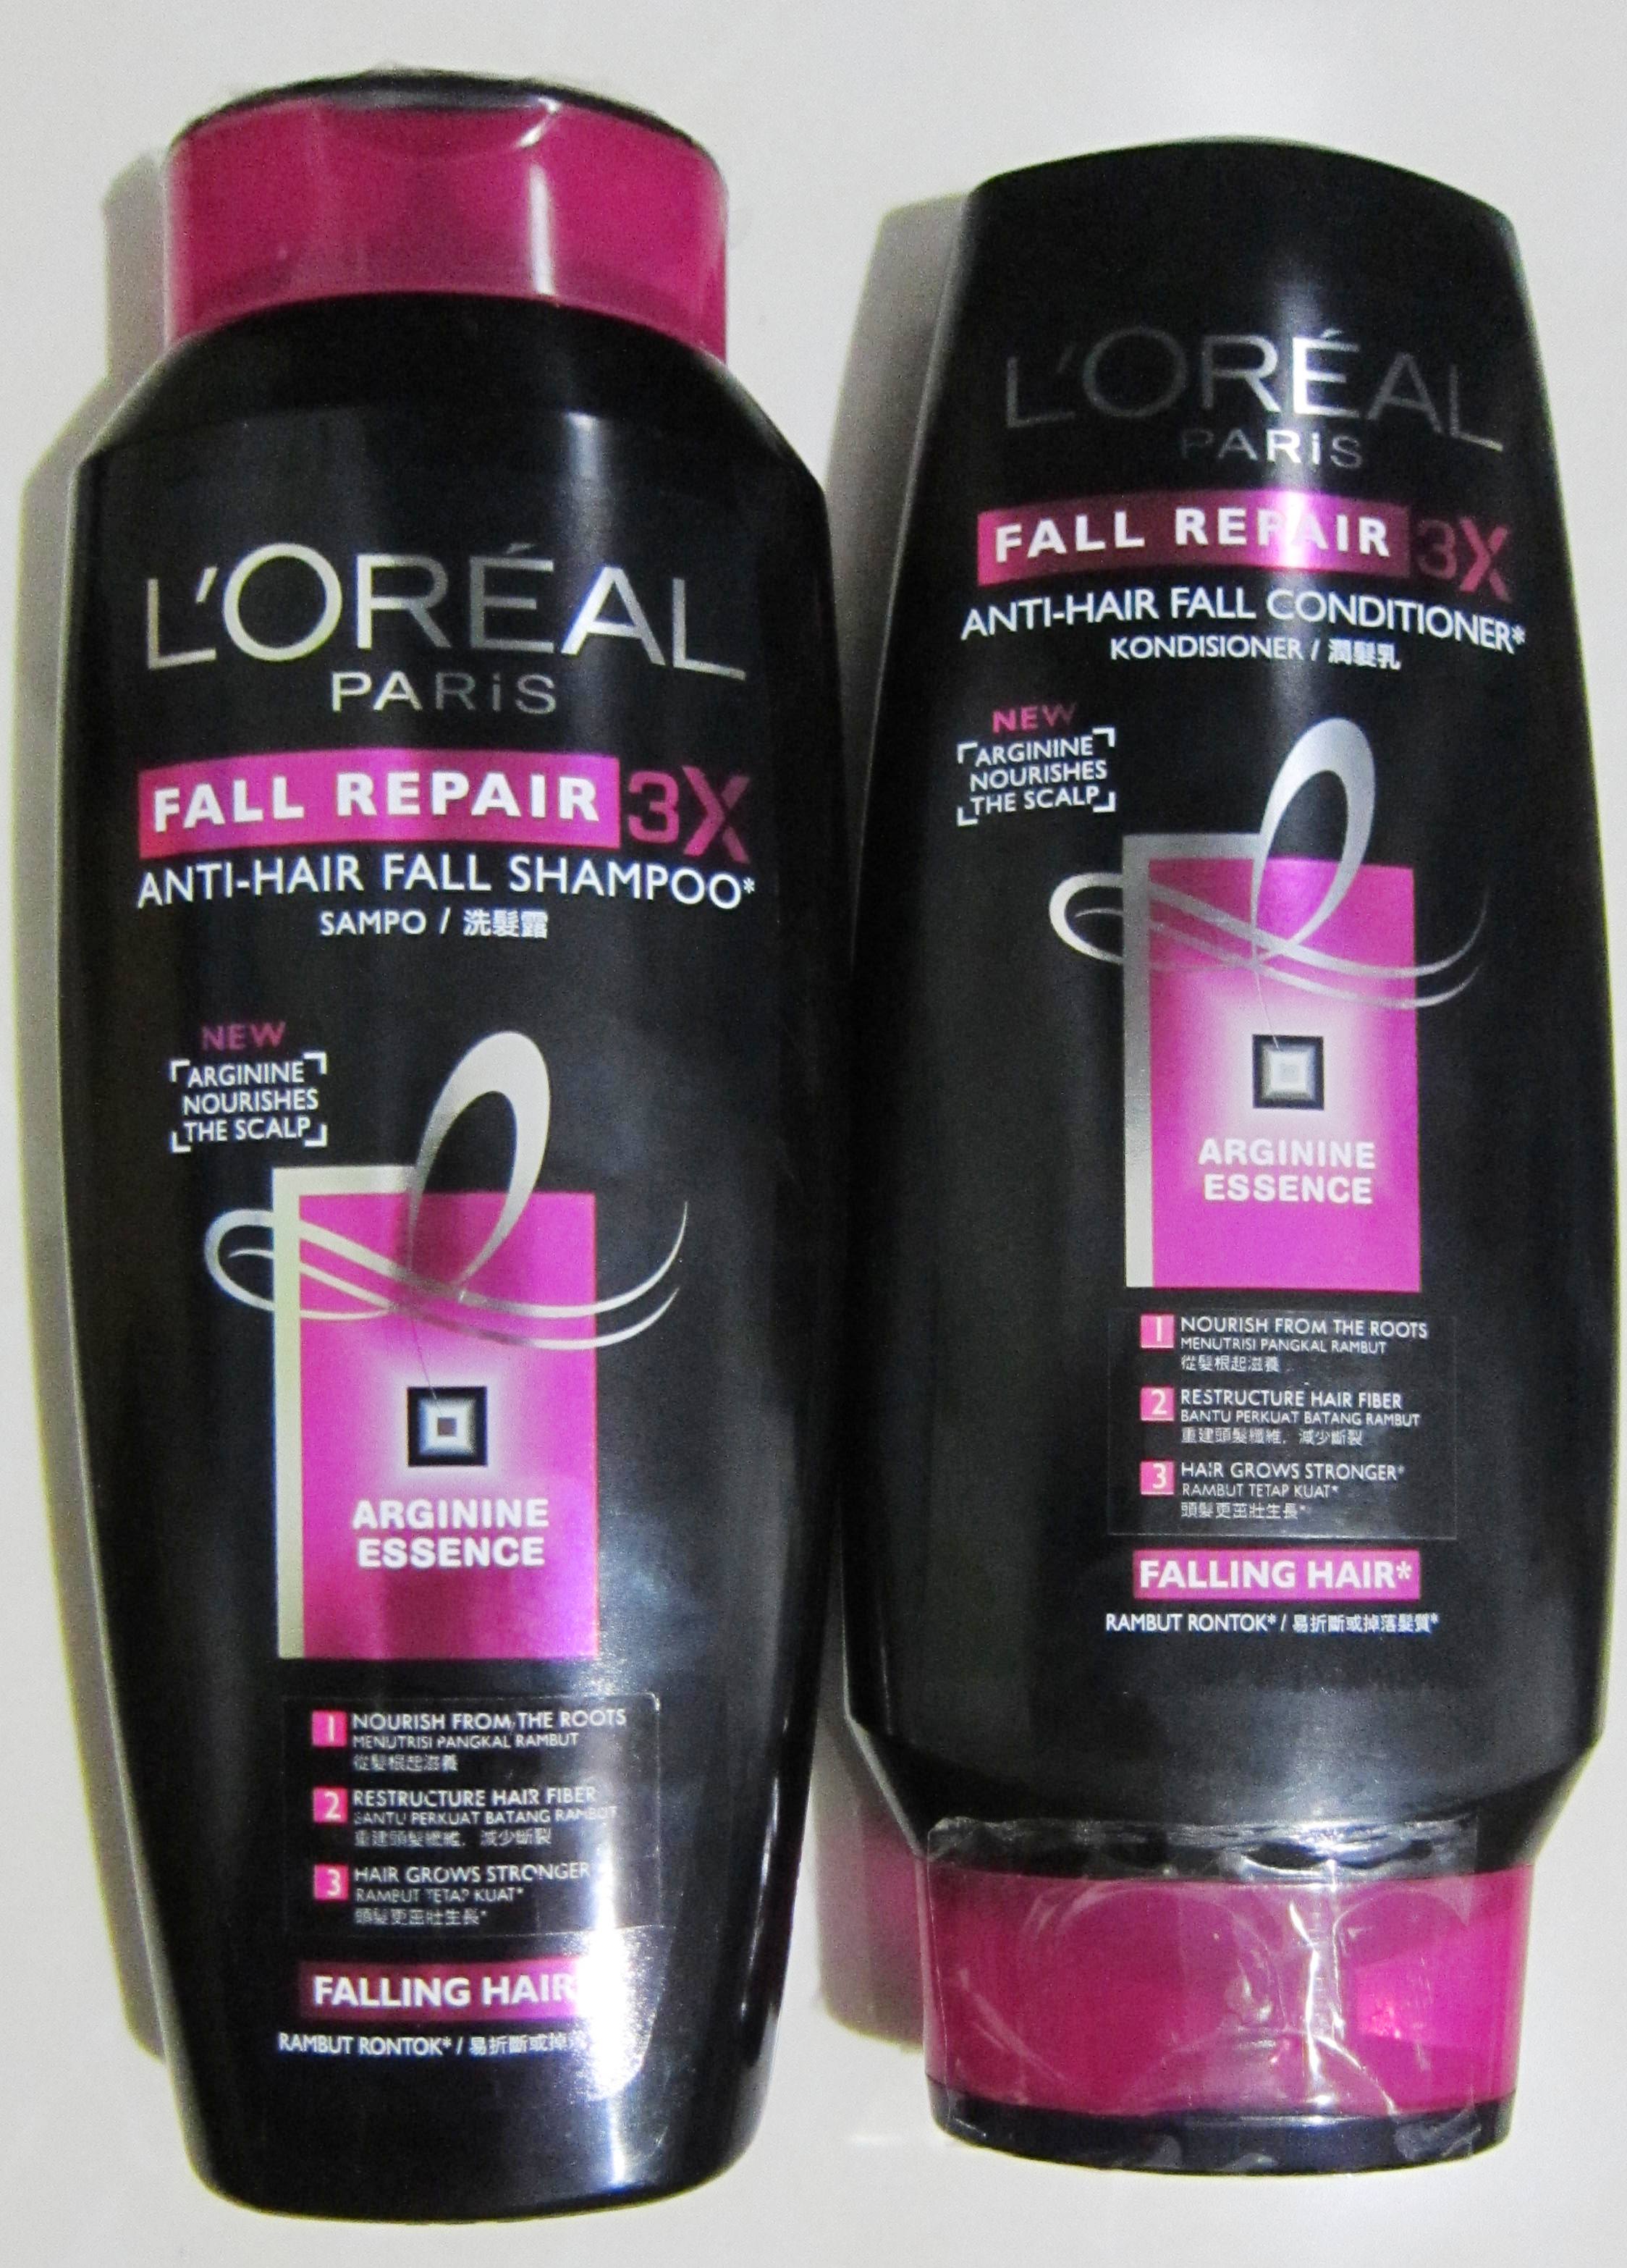 REVIEW: L'oreal Paris Fall Repair 3X Shampoo and Conditioner |  writingismyhappyplace